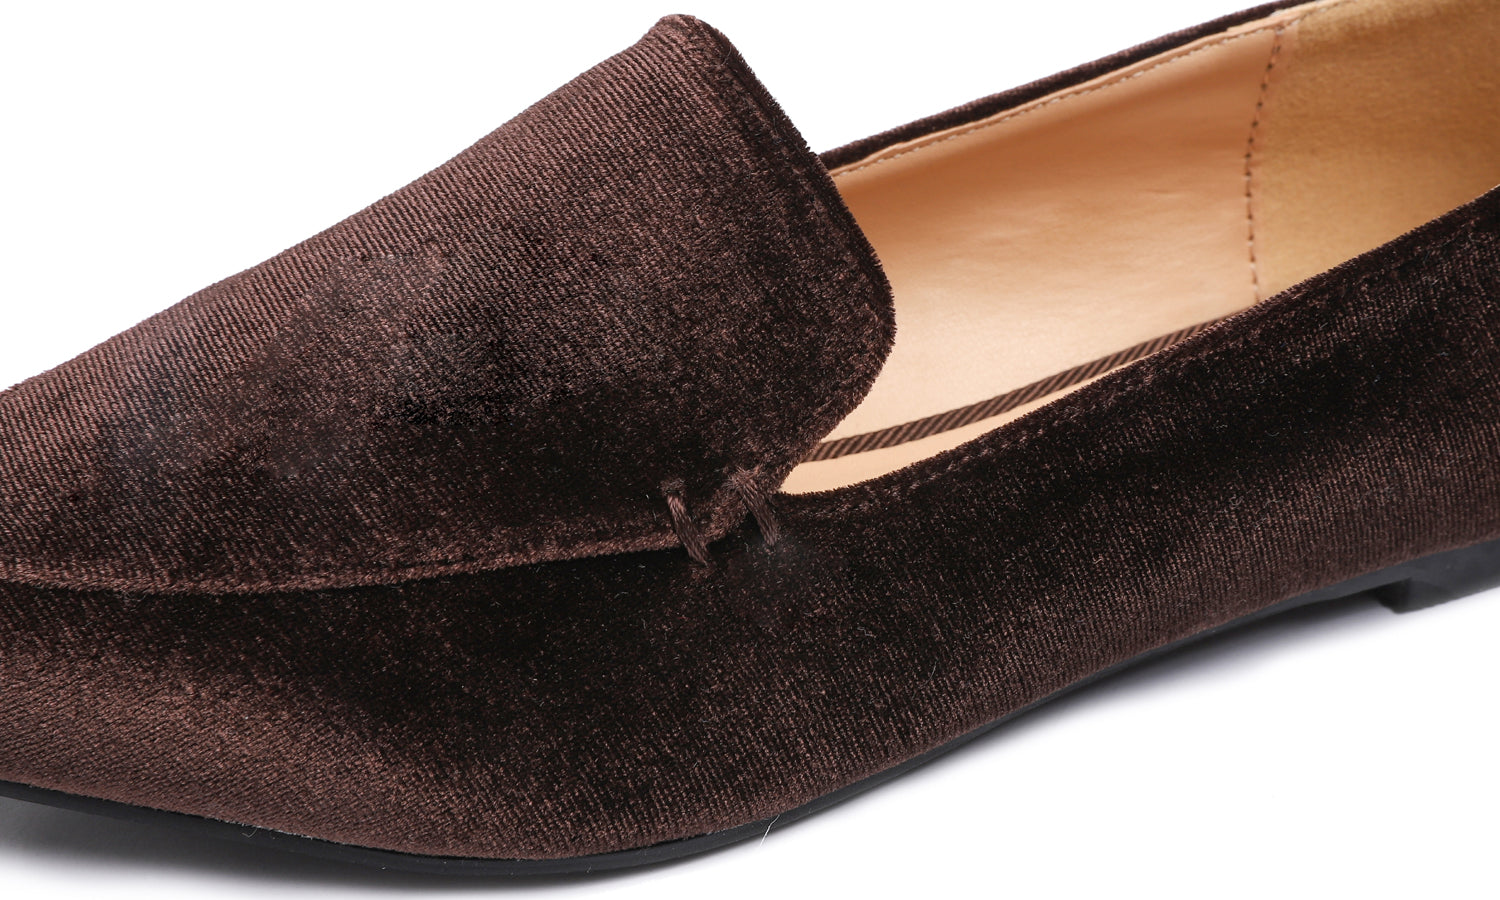 Feversole Women's Loafer Flat Pointed Fashion Slip On Comfort Driving Office Shoes Brown Velvet